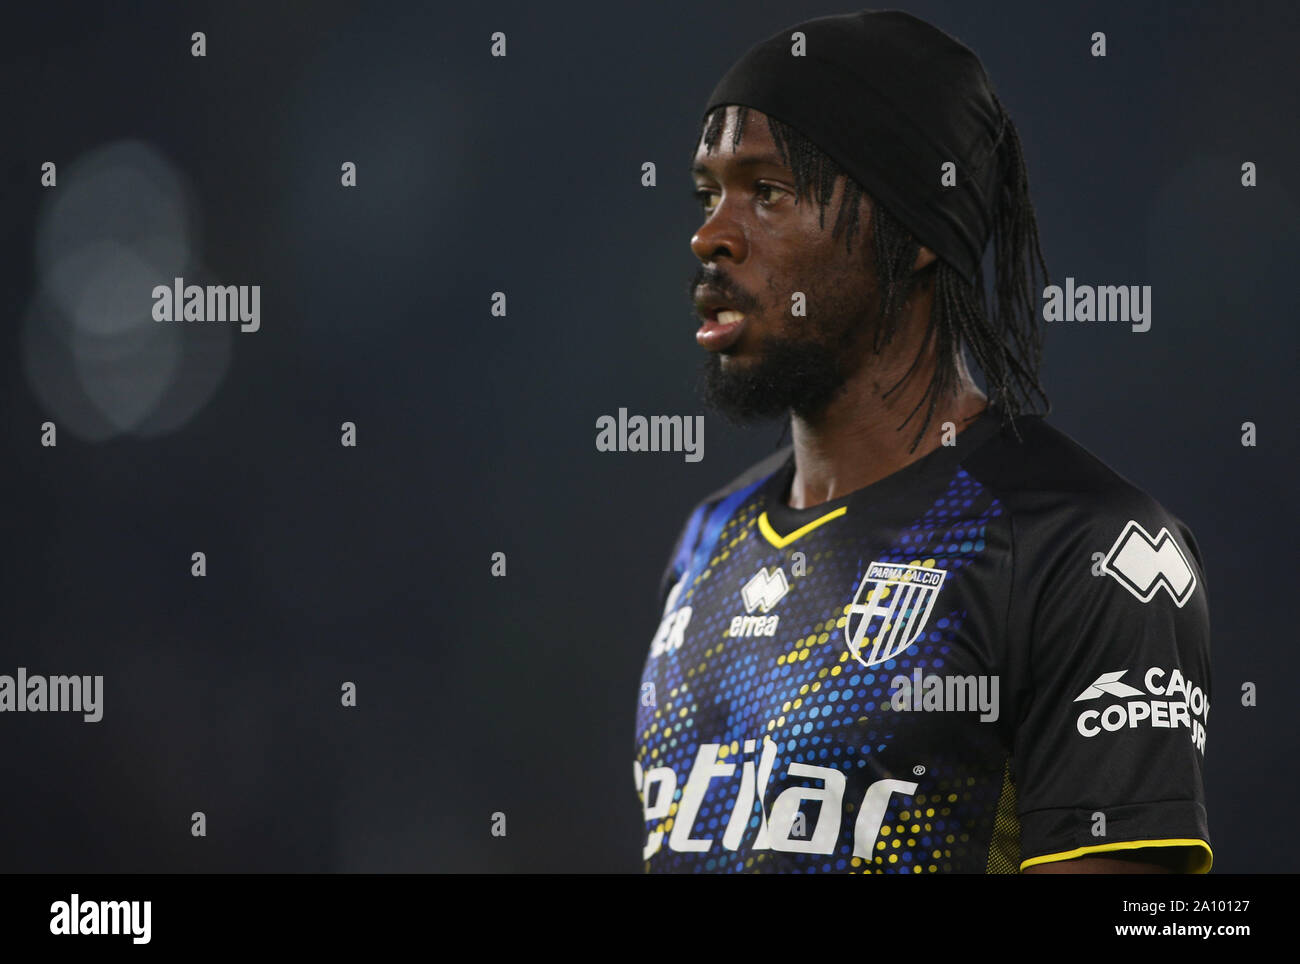 Rome, Italy. 22nd Sep, 2019. Rome, Italy - September 22, 2019:GERVINHO (PARMA) in action during the Italian Serie A soccer match between SS LAZIO and PARMA, at Olympic Stadium in Rome. Credit: Independent Photo Agency/Alamy Live News Stock Photo